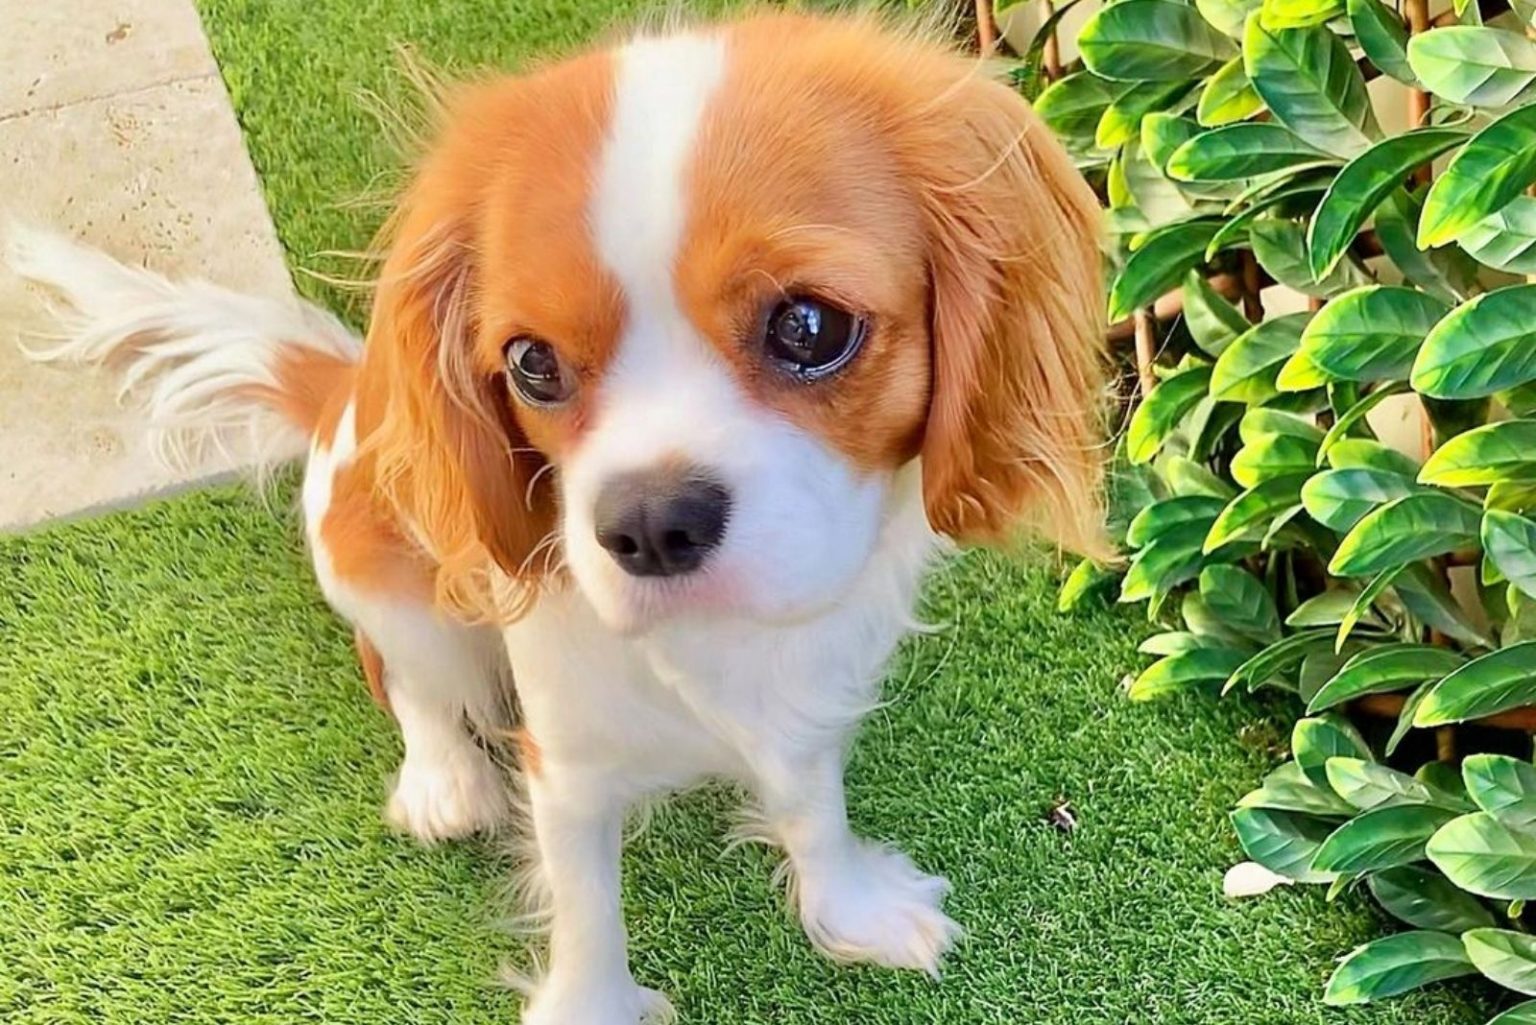 Teacup Cavalier King Charles Spaniel The Ultimate Guide